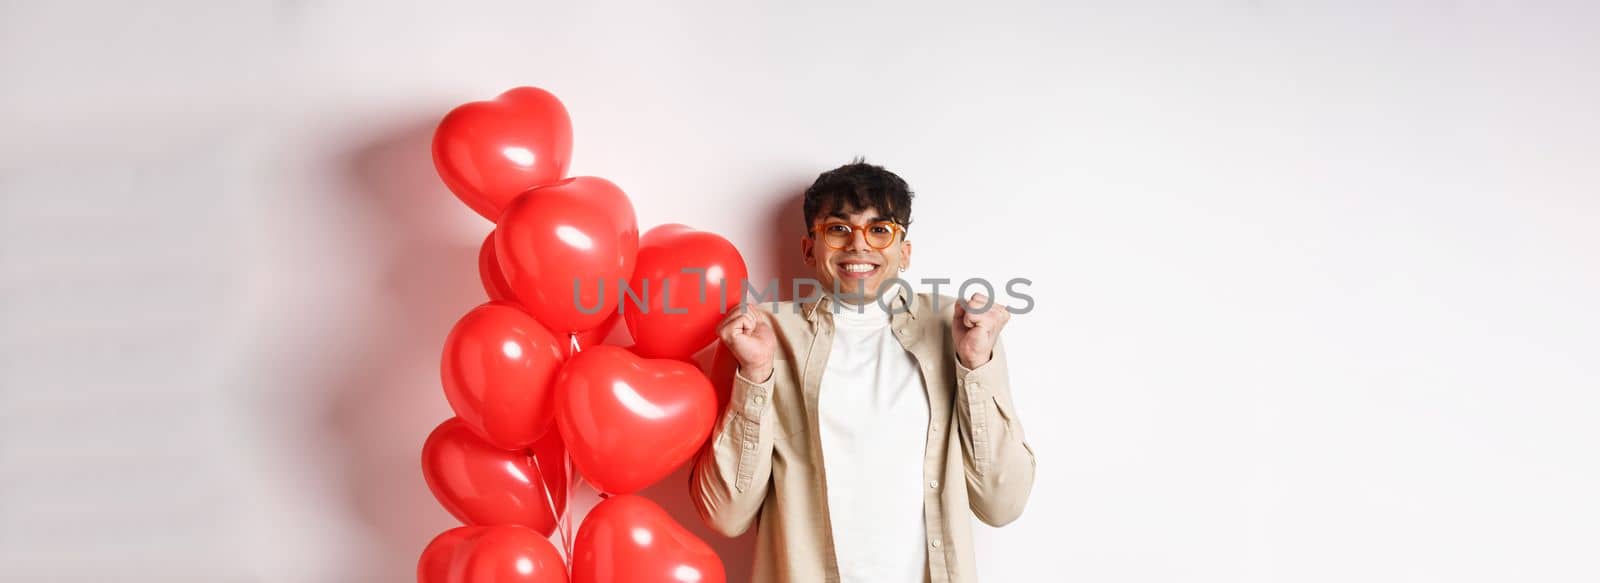 Valentines day. Excited smiling man eager to go on date, celebrating with lover, standing near red hears balloons, white background.